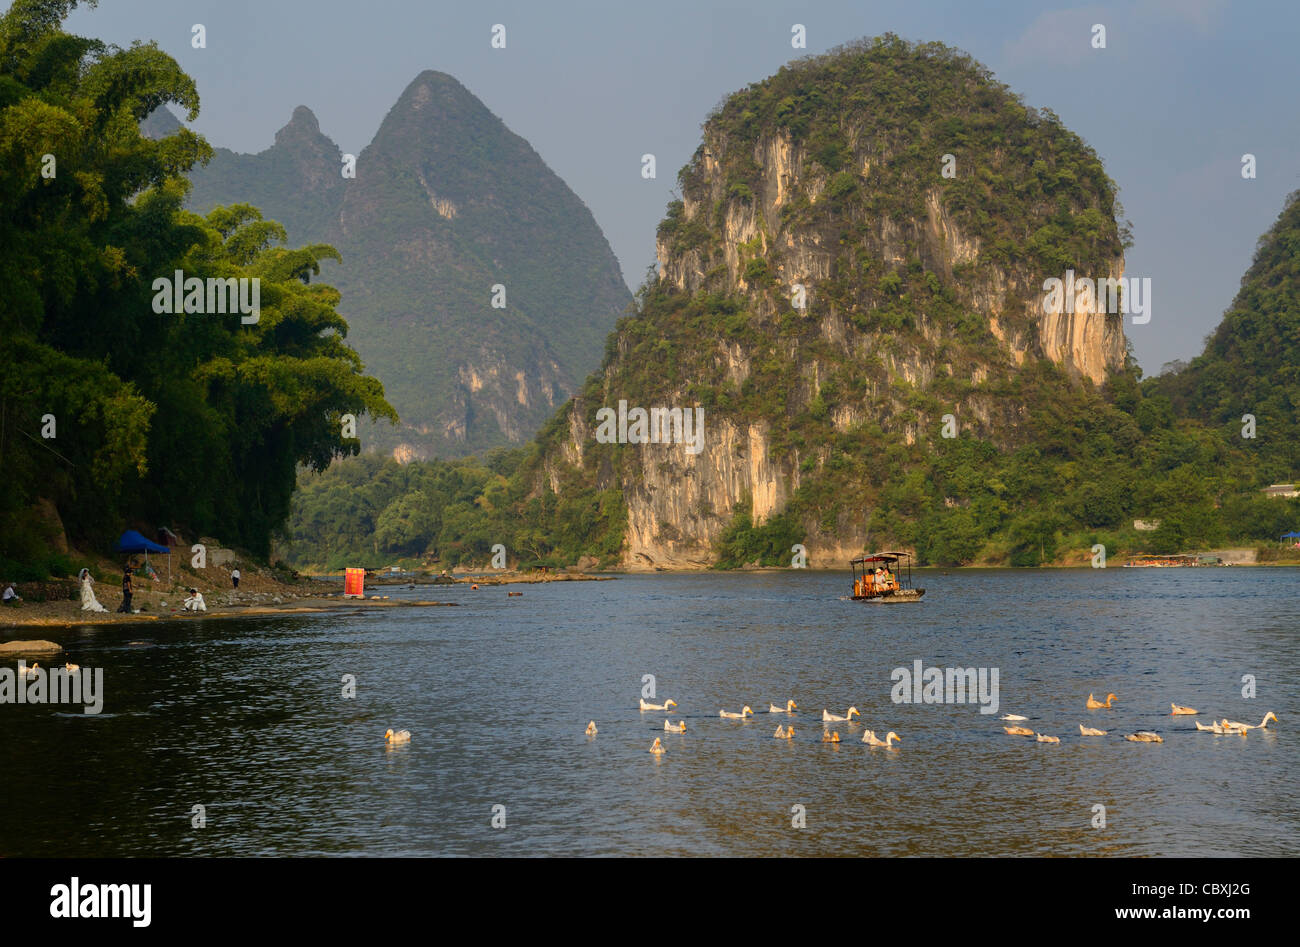 Bride and groom on the shores of the Li river with Karst peaks at Yangshuo Peoples Republic of China Stock Photo